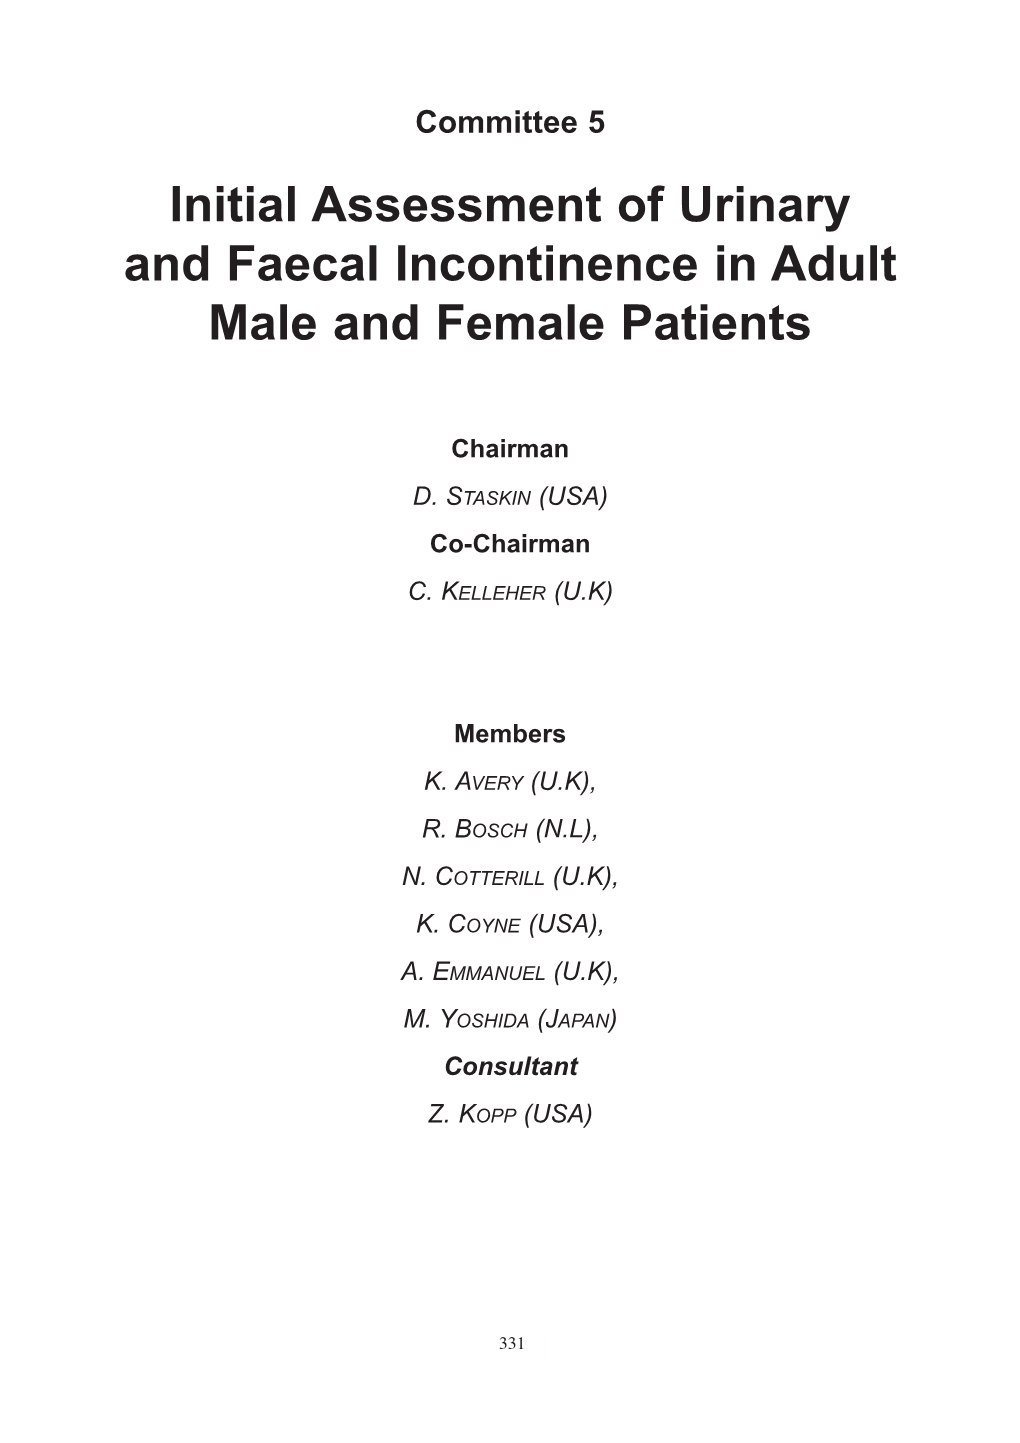 Initial Assessment of Urinary and Faecal Incontinence in Adult Male and Female Patients